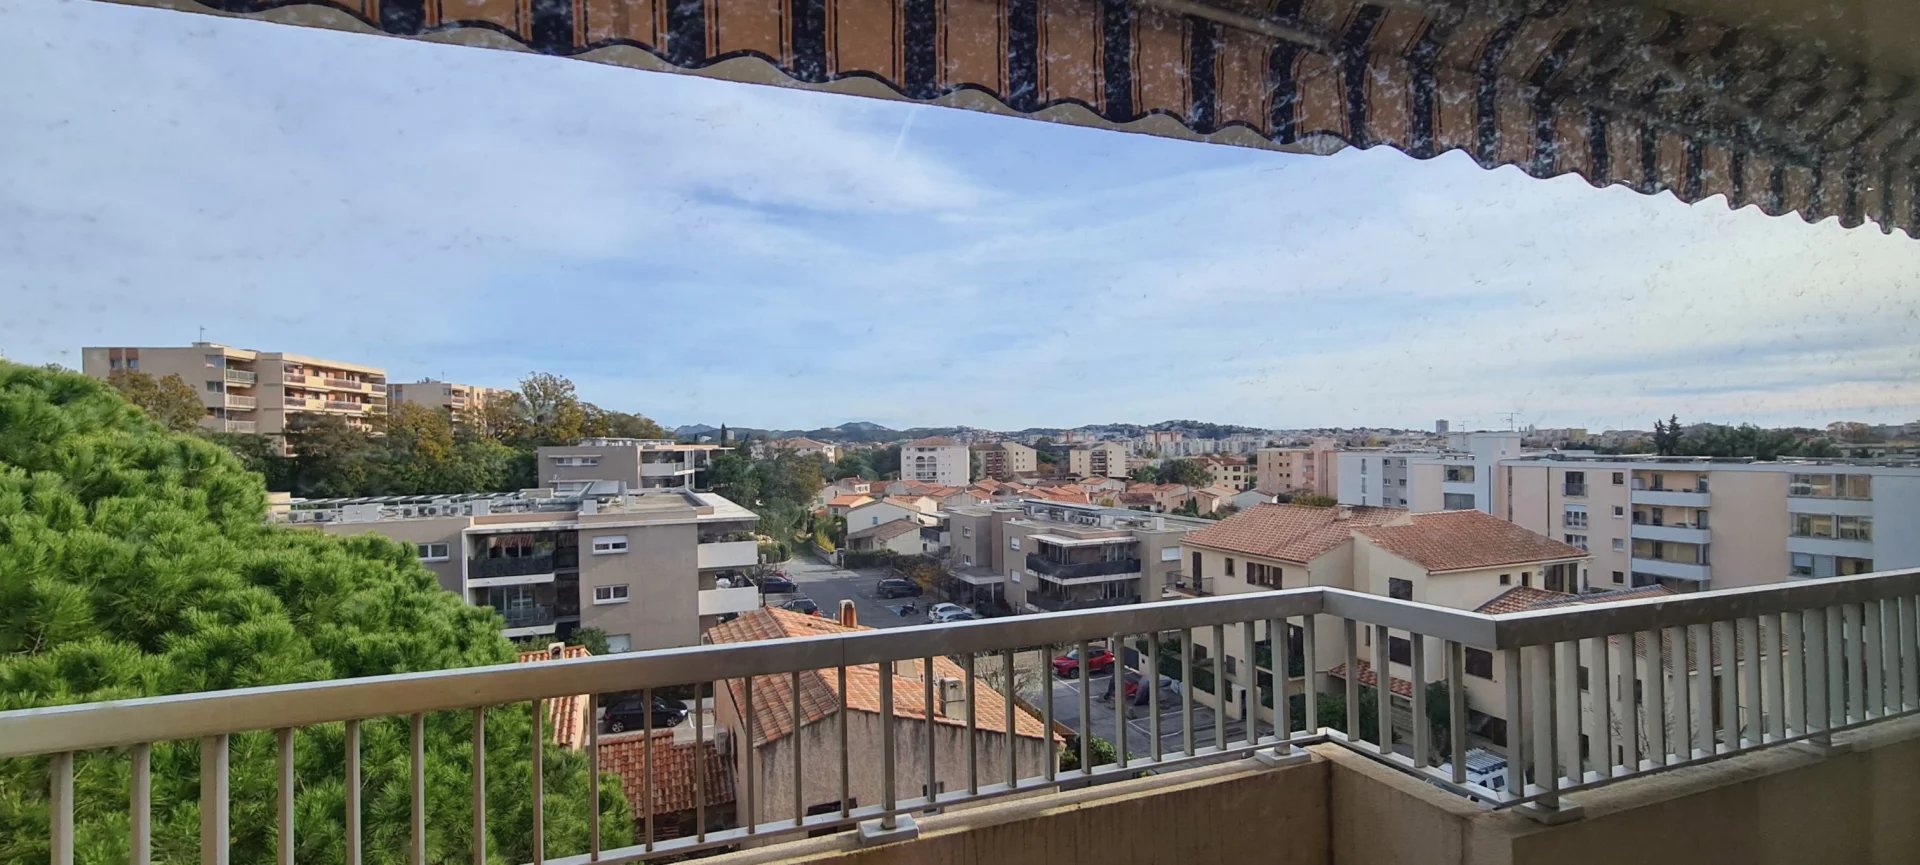 4 ROOM APARTMENT TOP FLOOR AT FREJUS, GATED RESIDENCE CLOSE TI THE CITY CENTRE